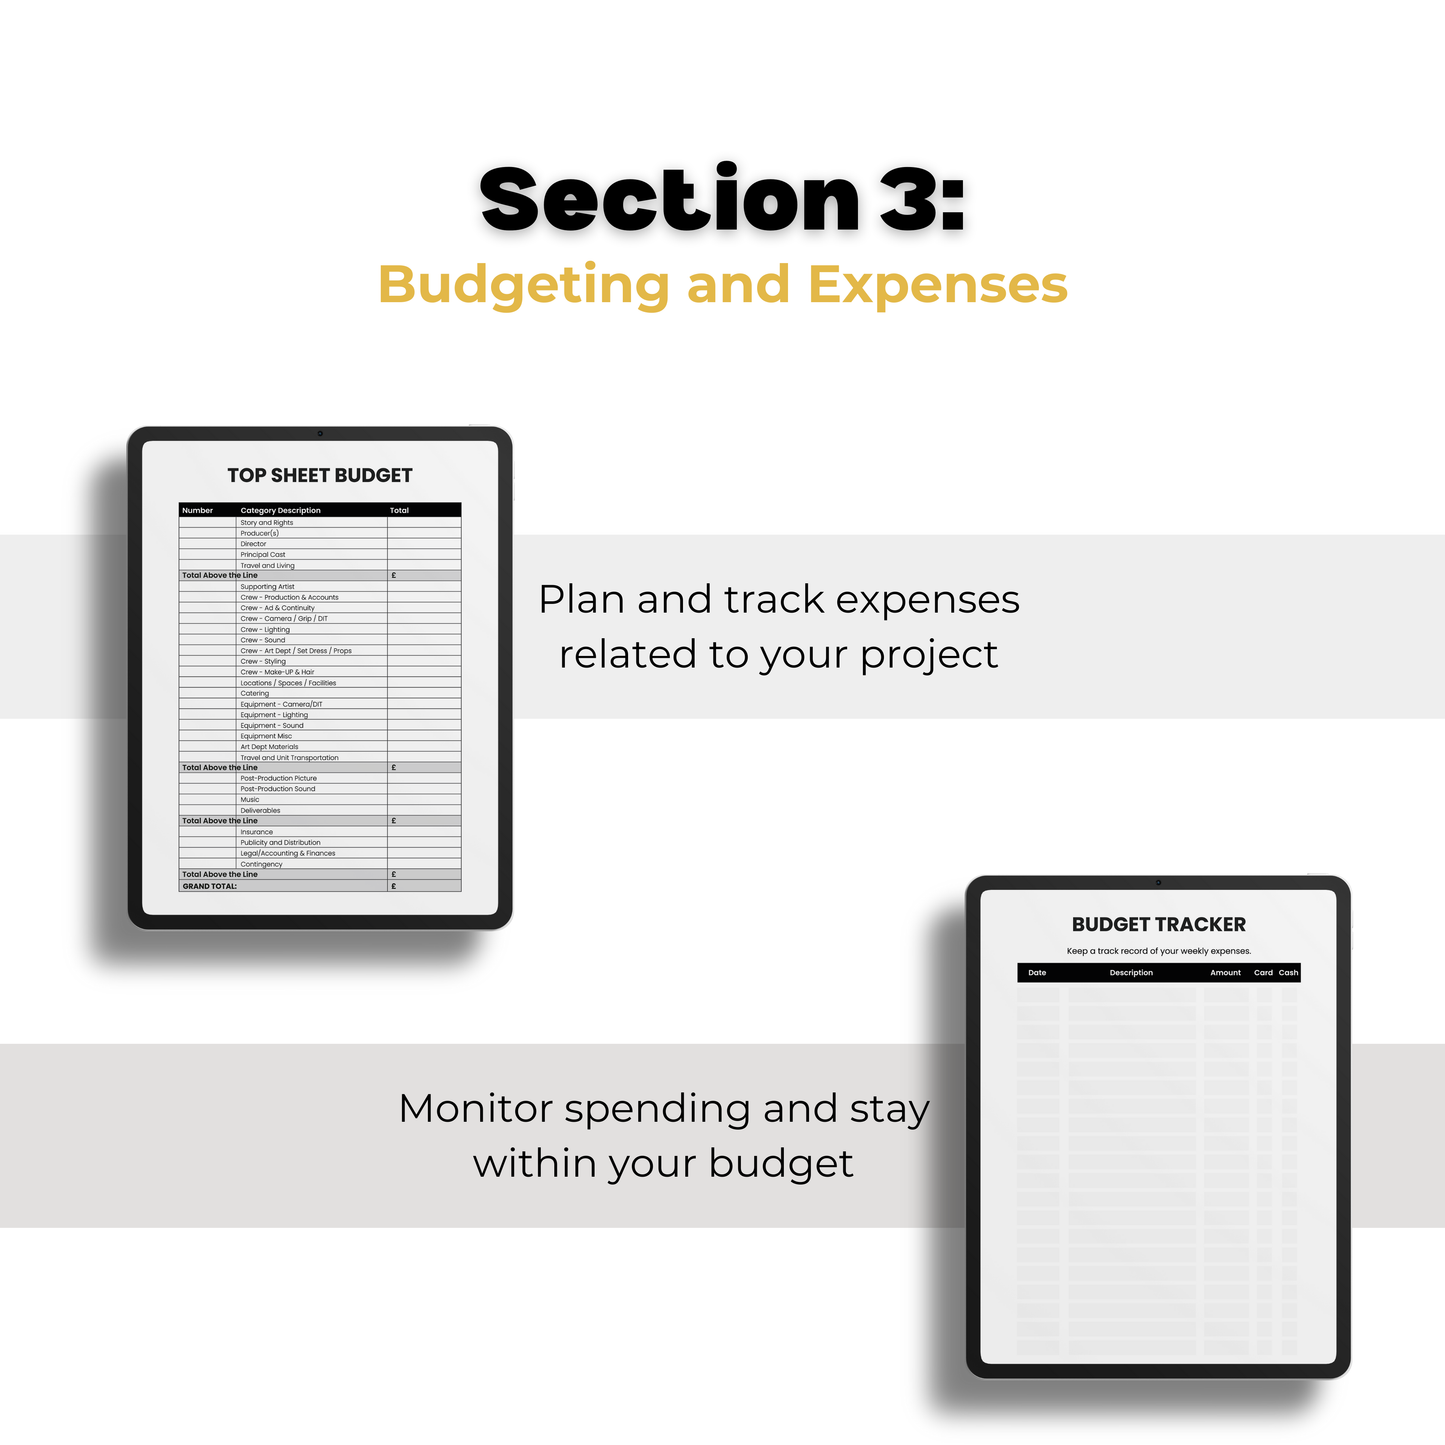 Digital planner page display showing top sheet filmmaking budget and budget tracker page.